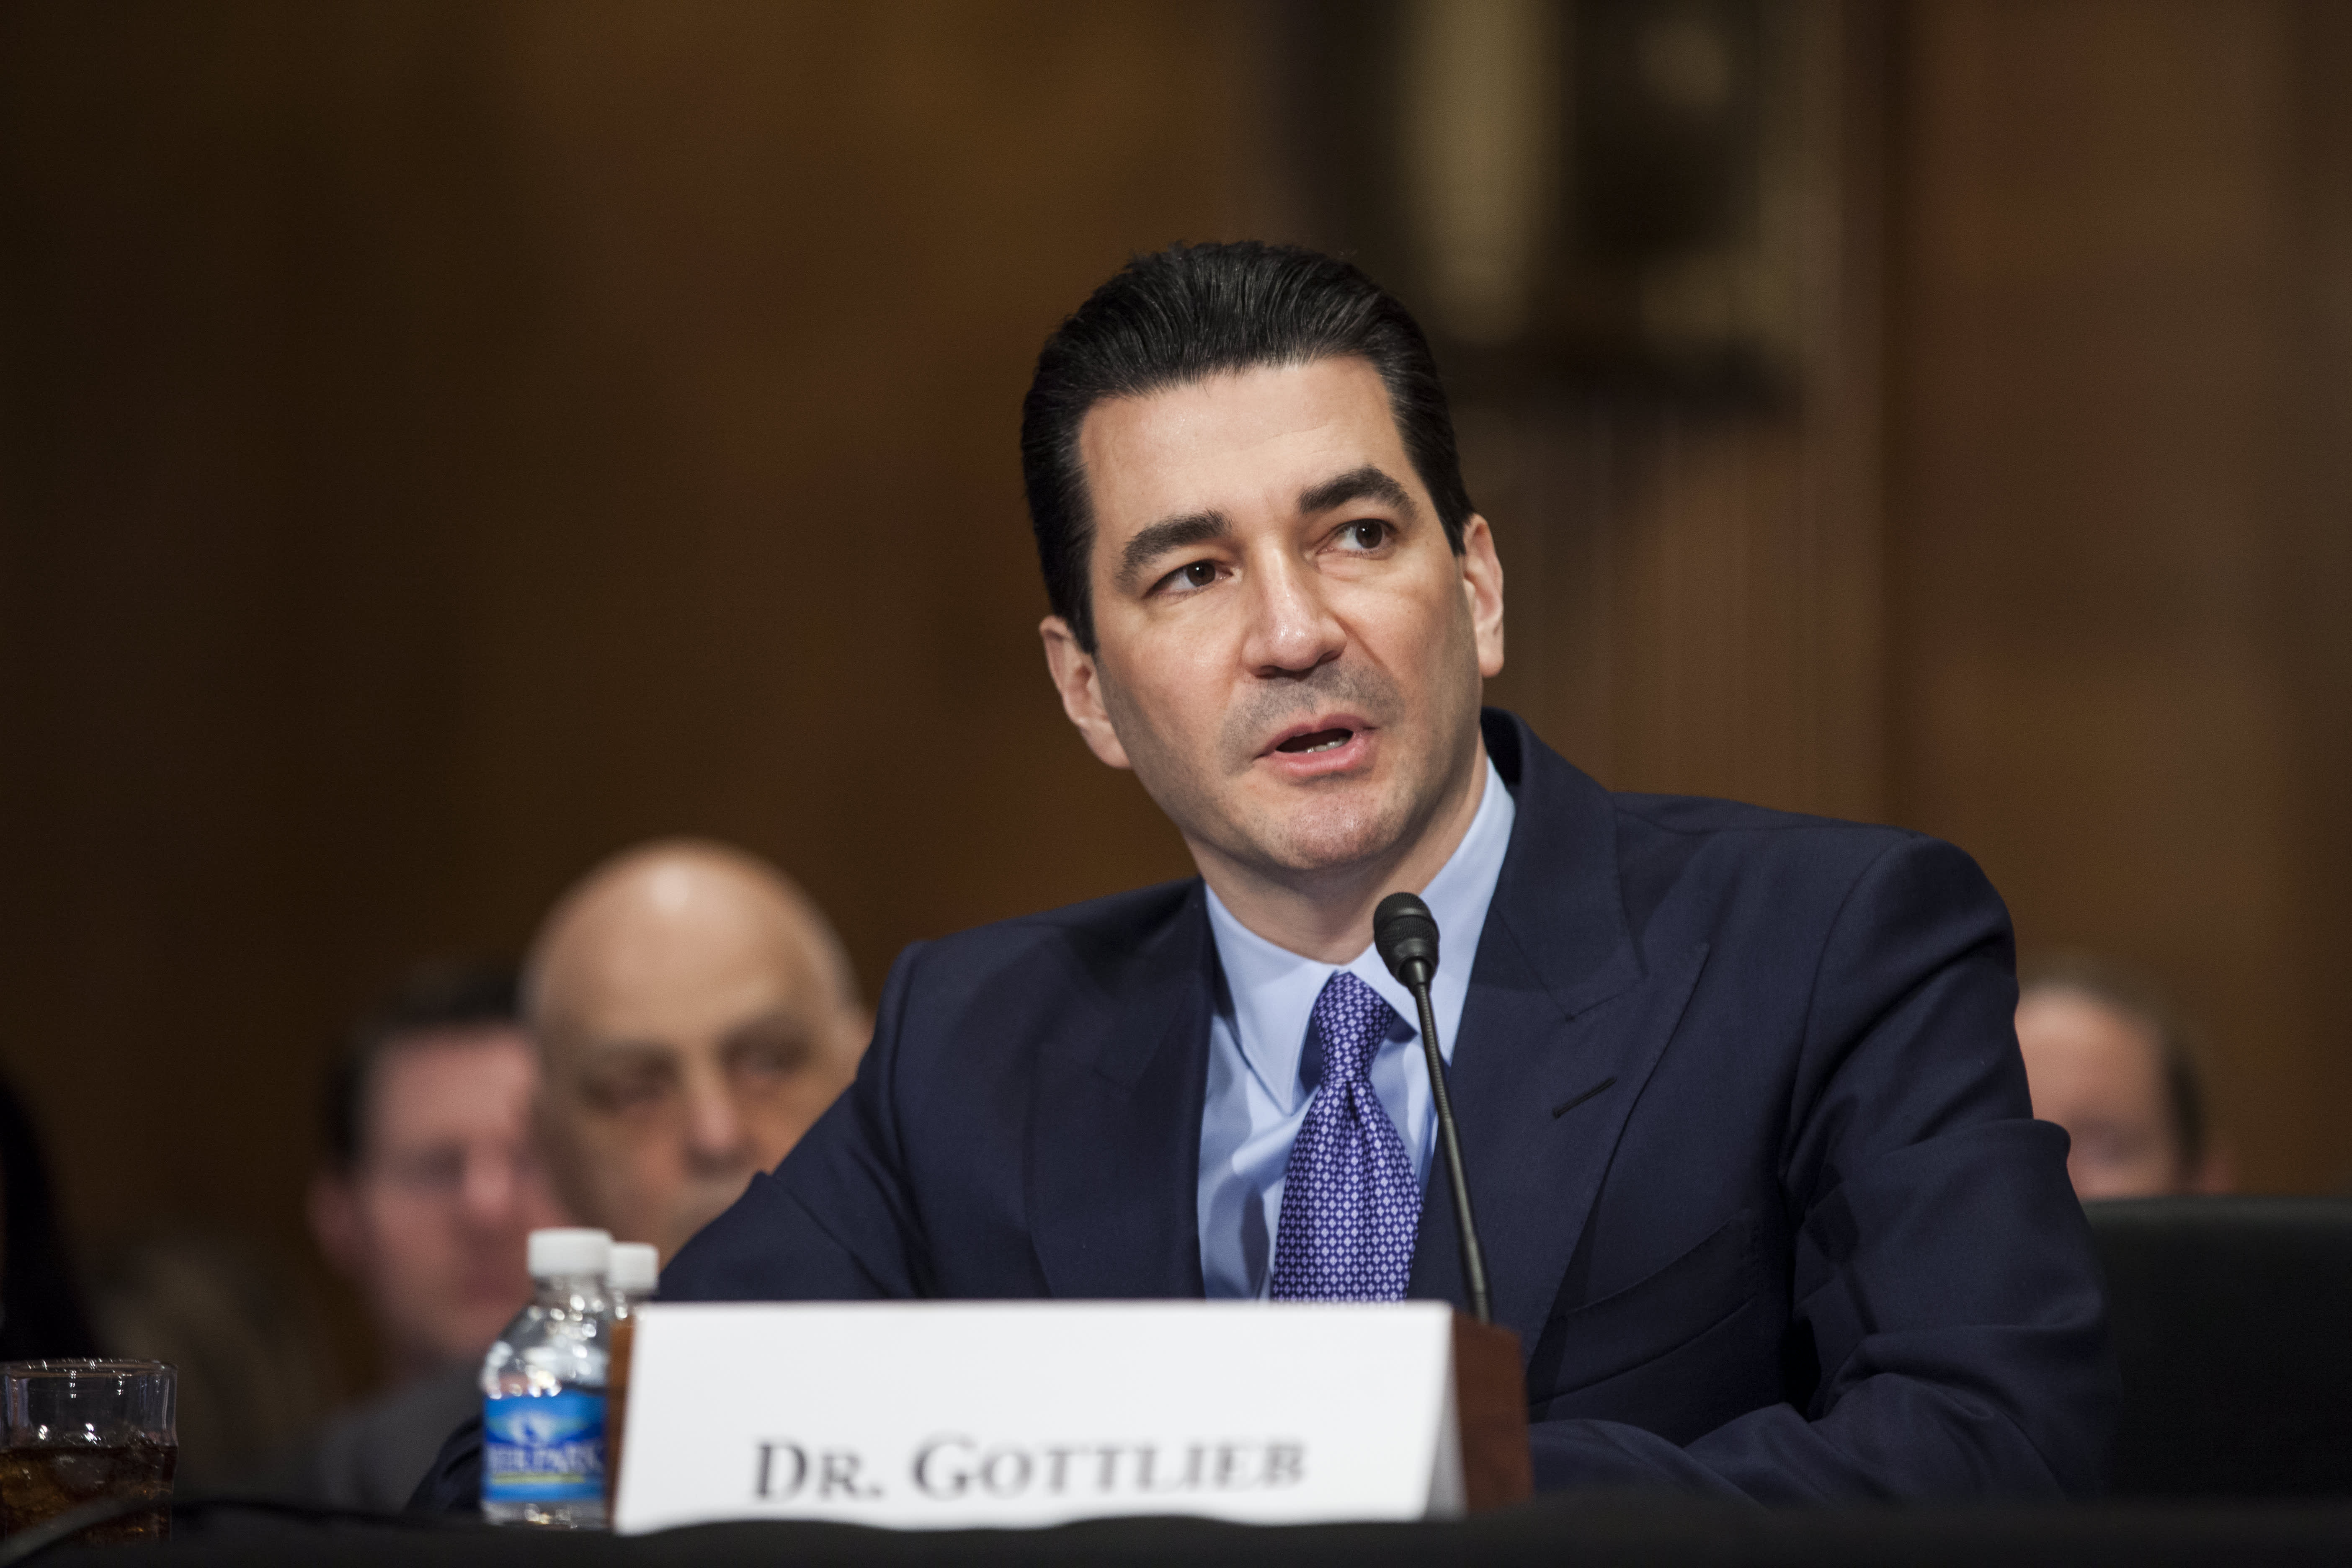 Dr. Scott Gottlieb says an estimate for 'herd immunity by April' too aggressive but directionally right - CNBC